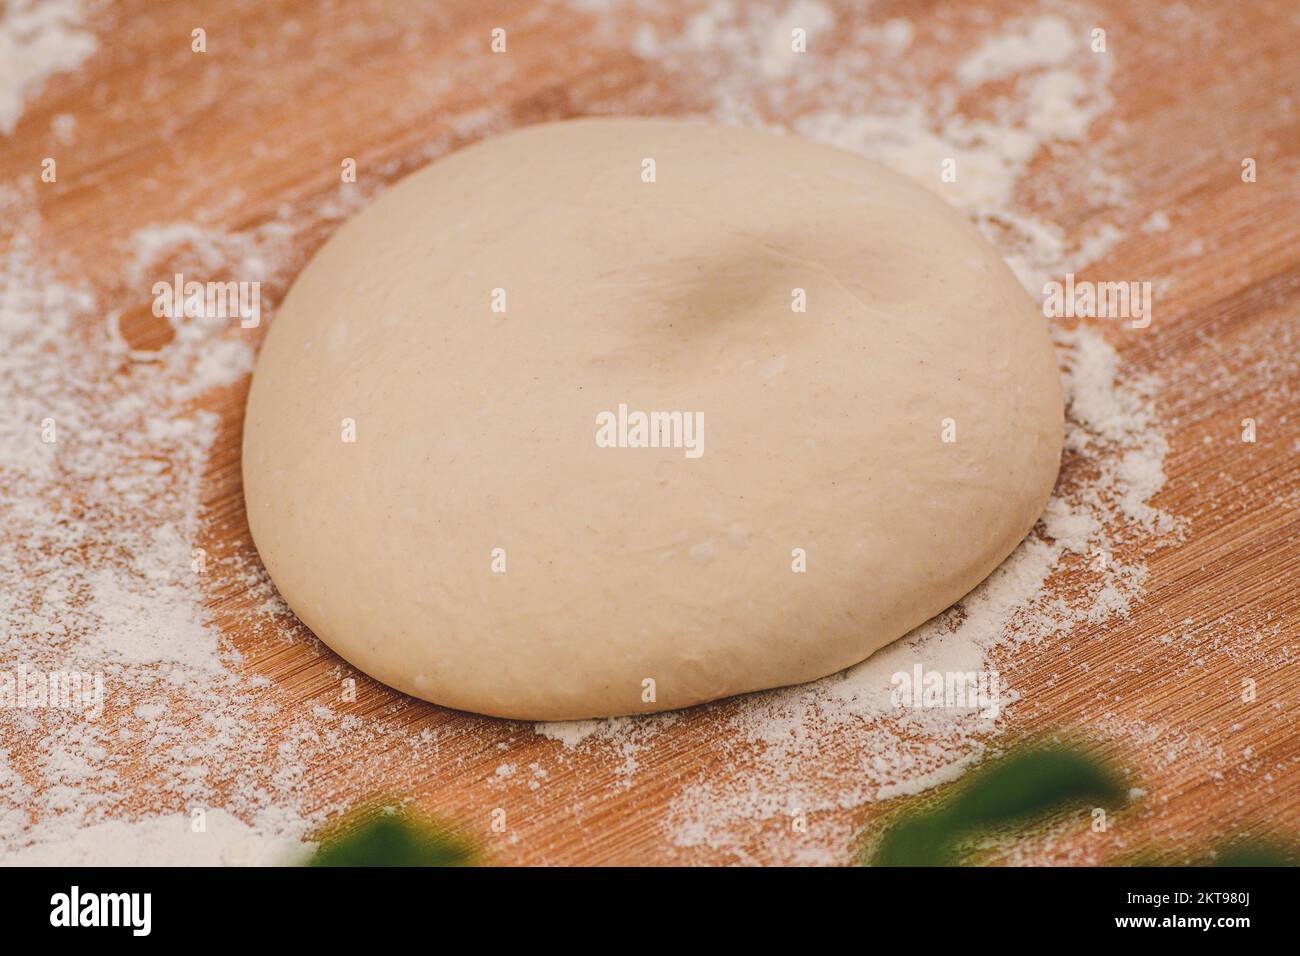 Dough for pizza on a wooden board with white flour and ingredients around ready for preparation, close up Stock Photo